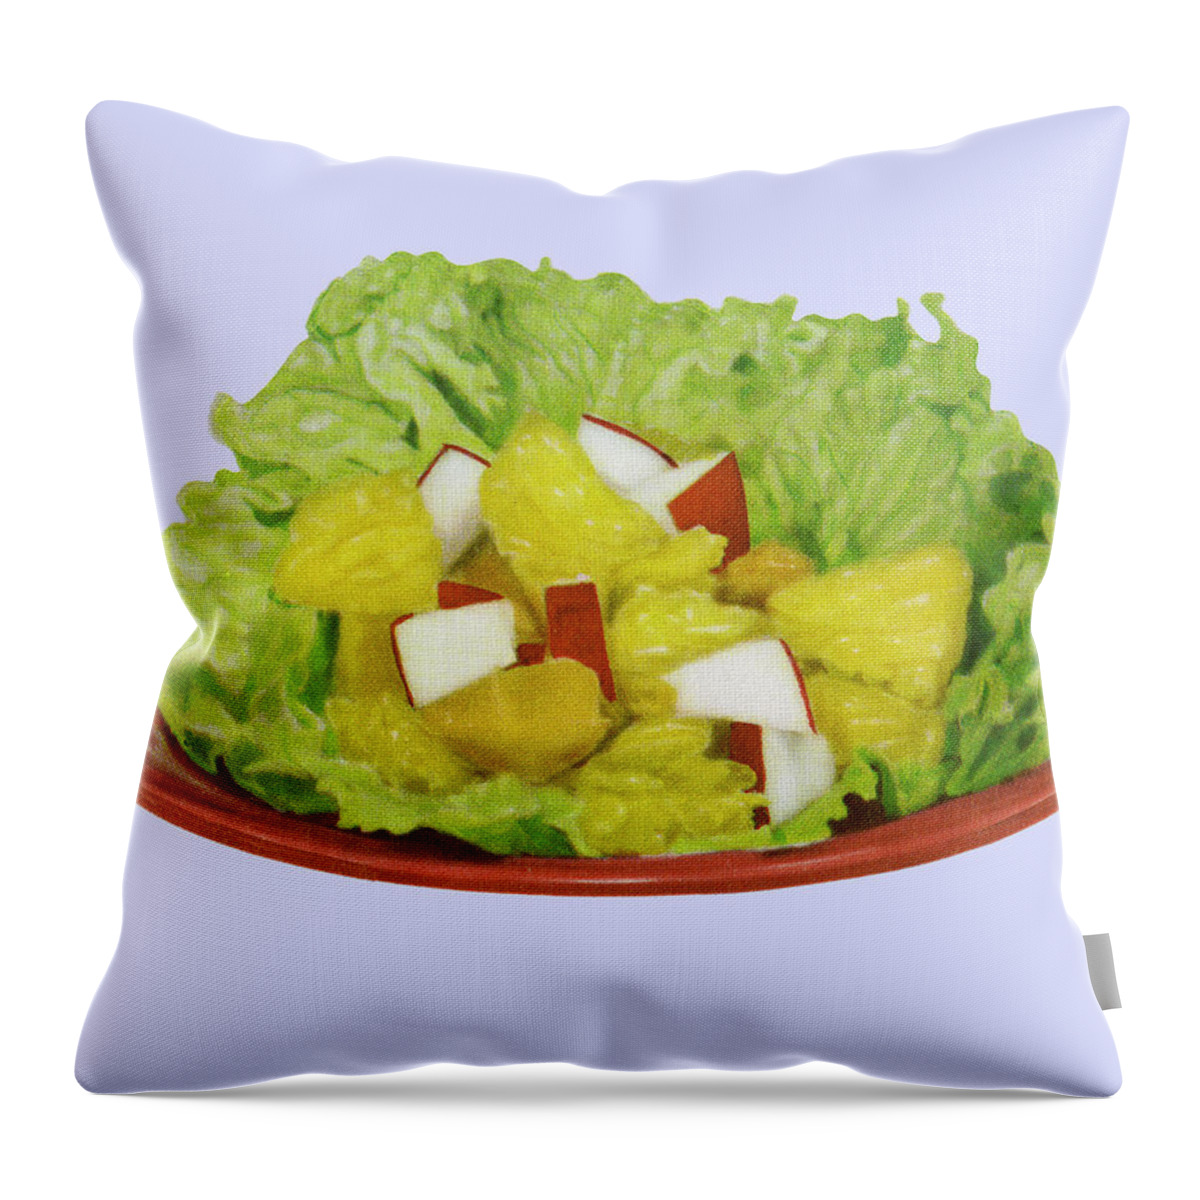 Apple Throw Pillow featuring the drawing Fruit Salad by CSA Images